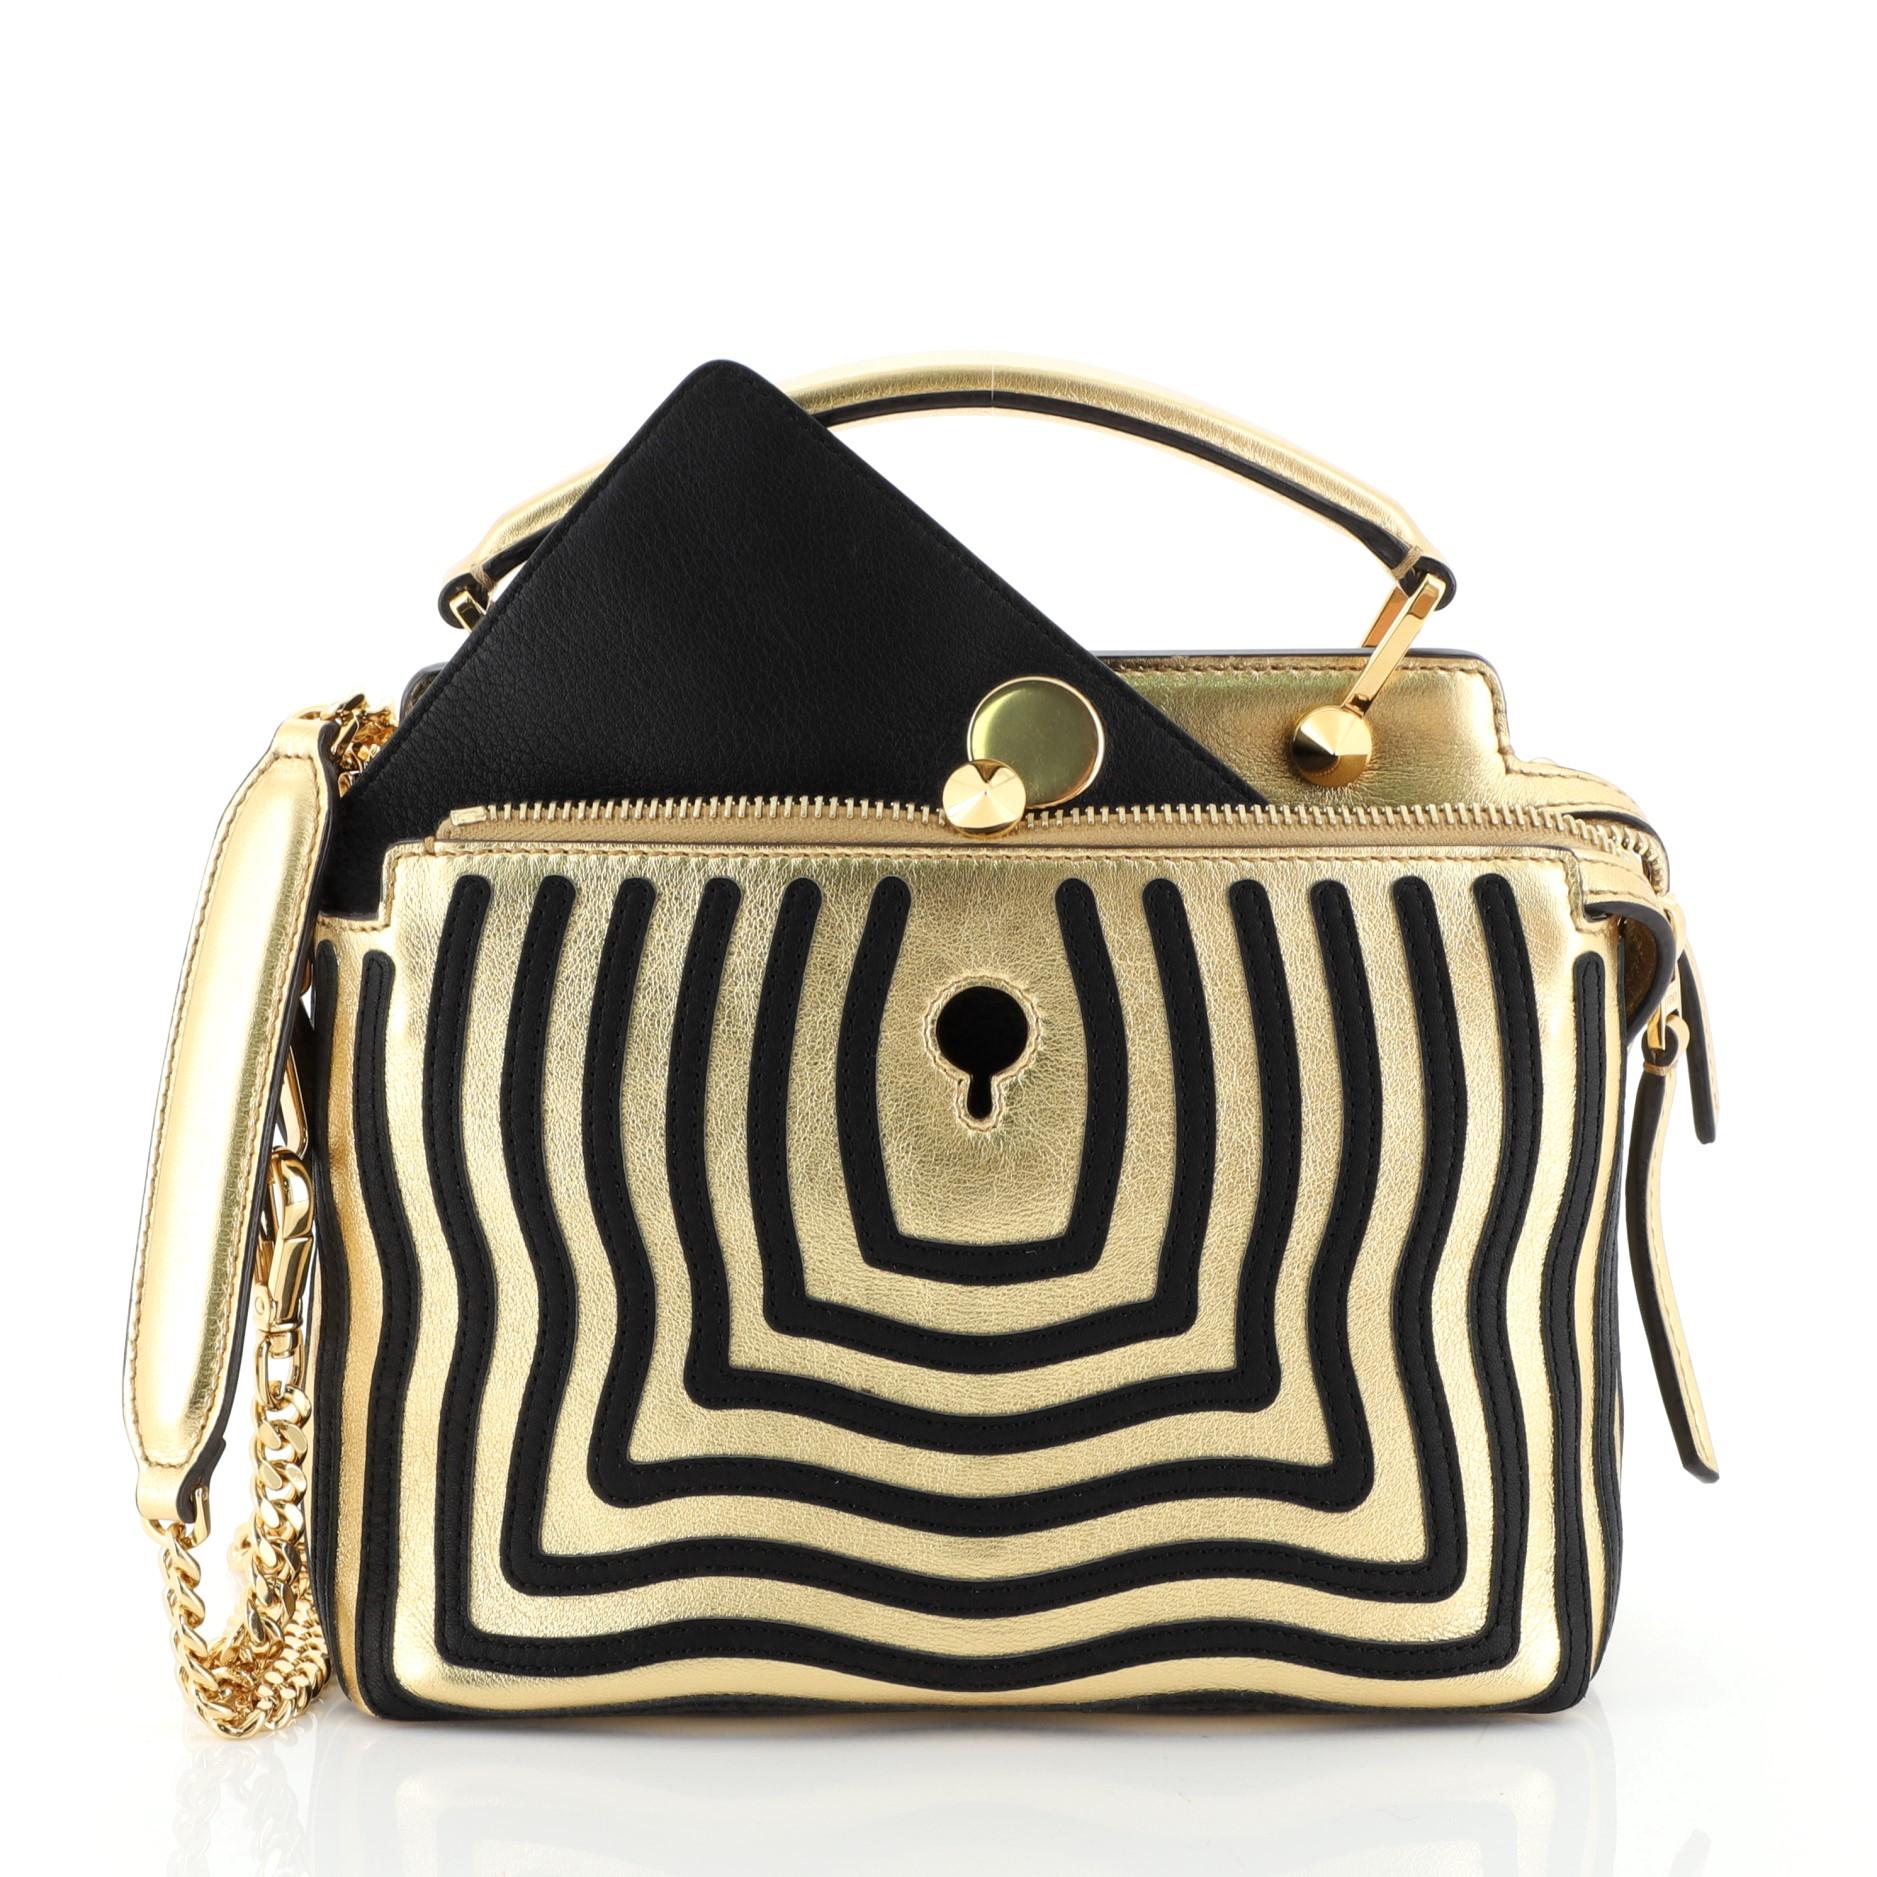 This Fendi DotCom Click Top Handle Bag Hypnotic Leather Small, crafted from gold leather, features dual chain straps with leather pads, two zip top compartments with snap ends, conical stud embellishment, and gold-tone hardware. Its extended zip